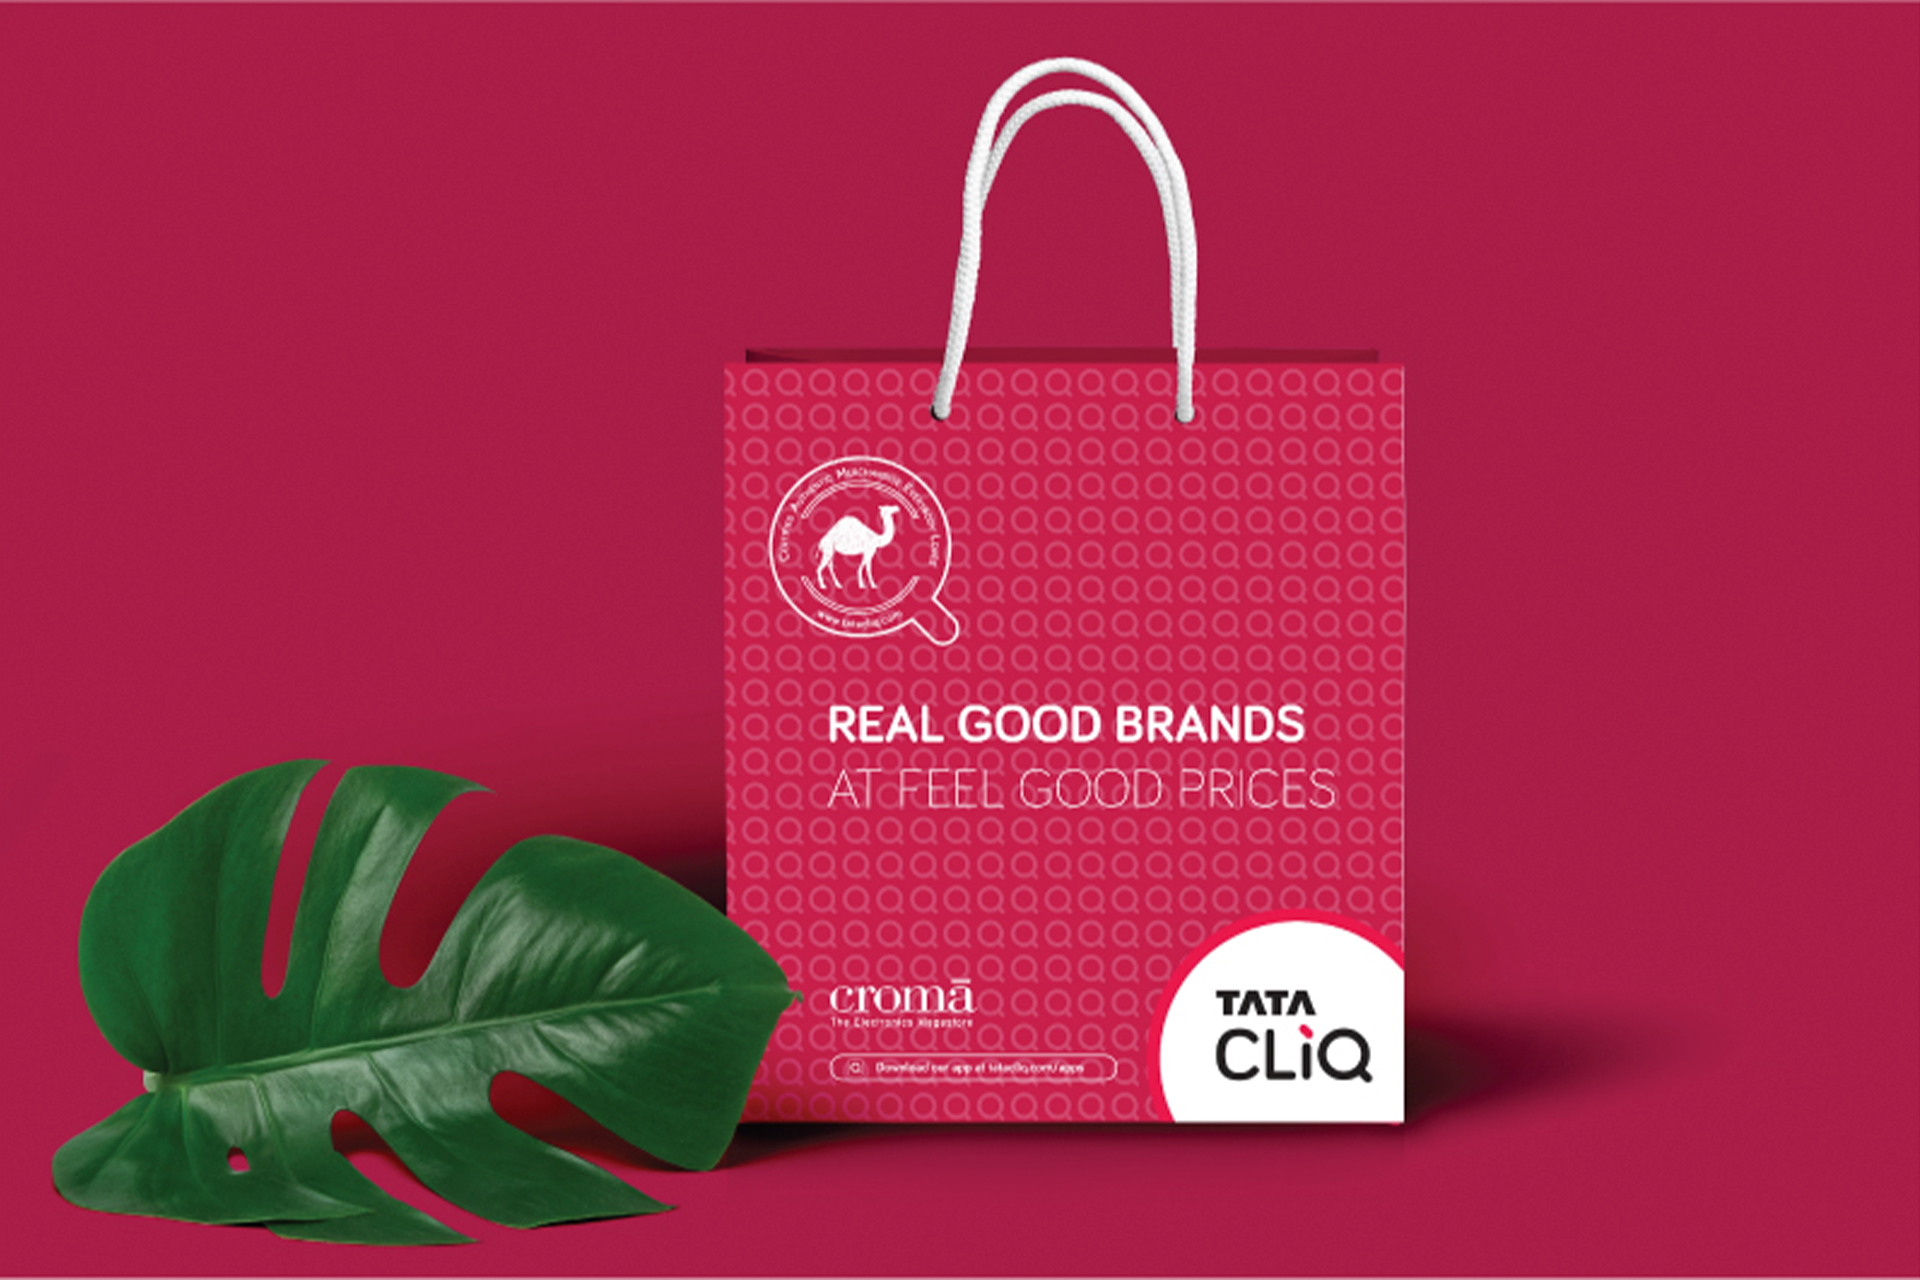 Photo of a Tata Cliq ad "Real good brands at feel good prices"